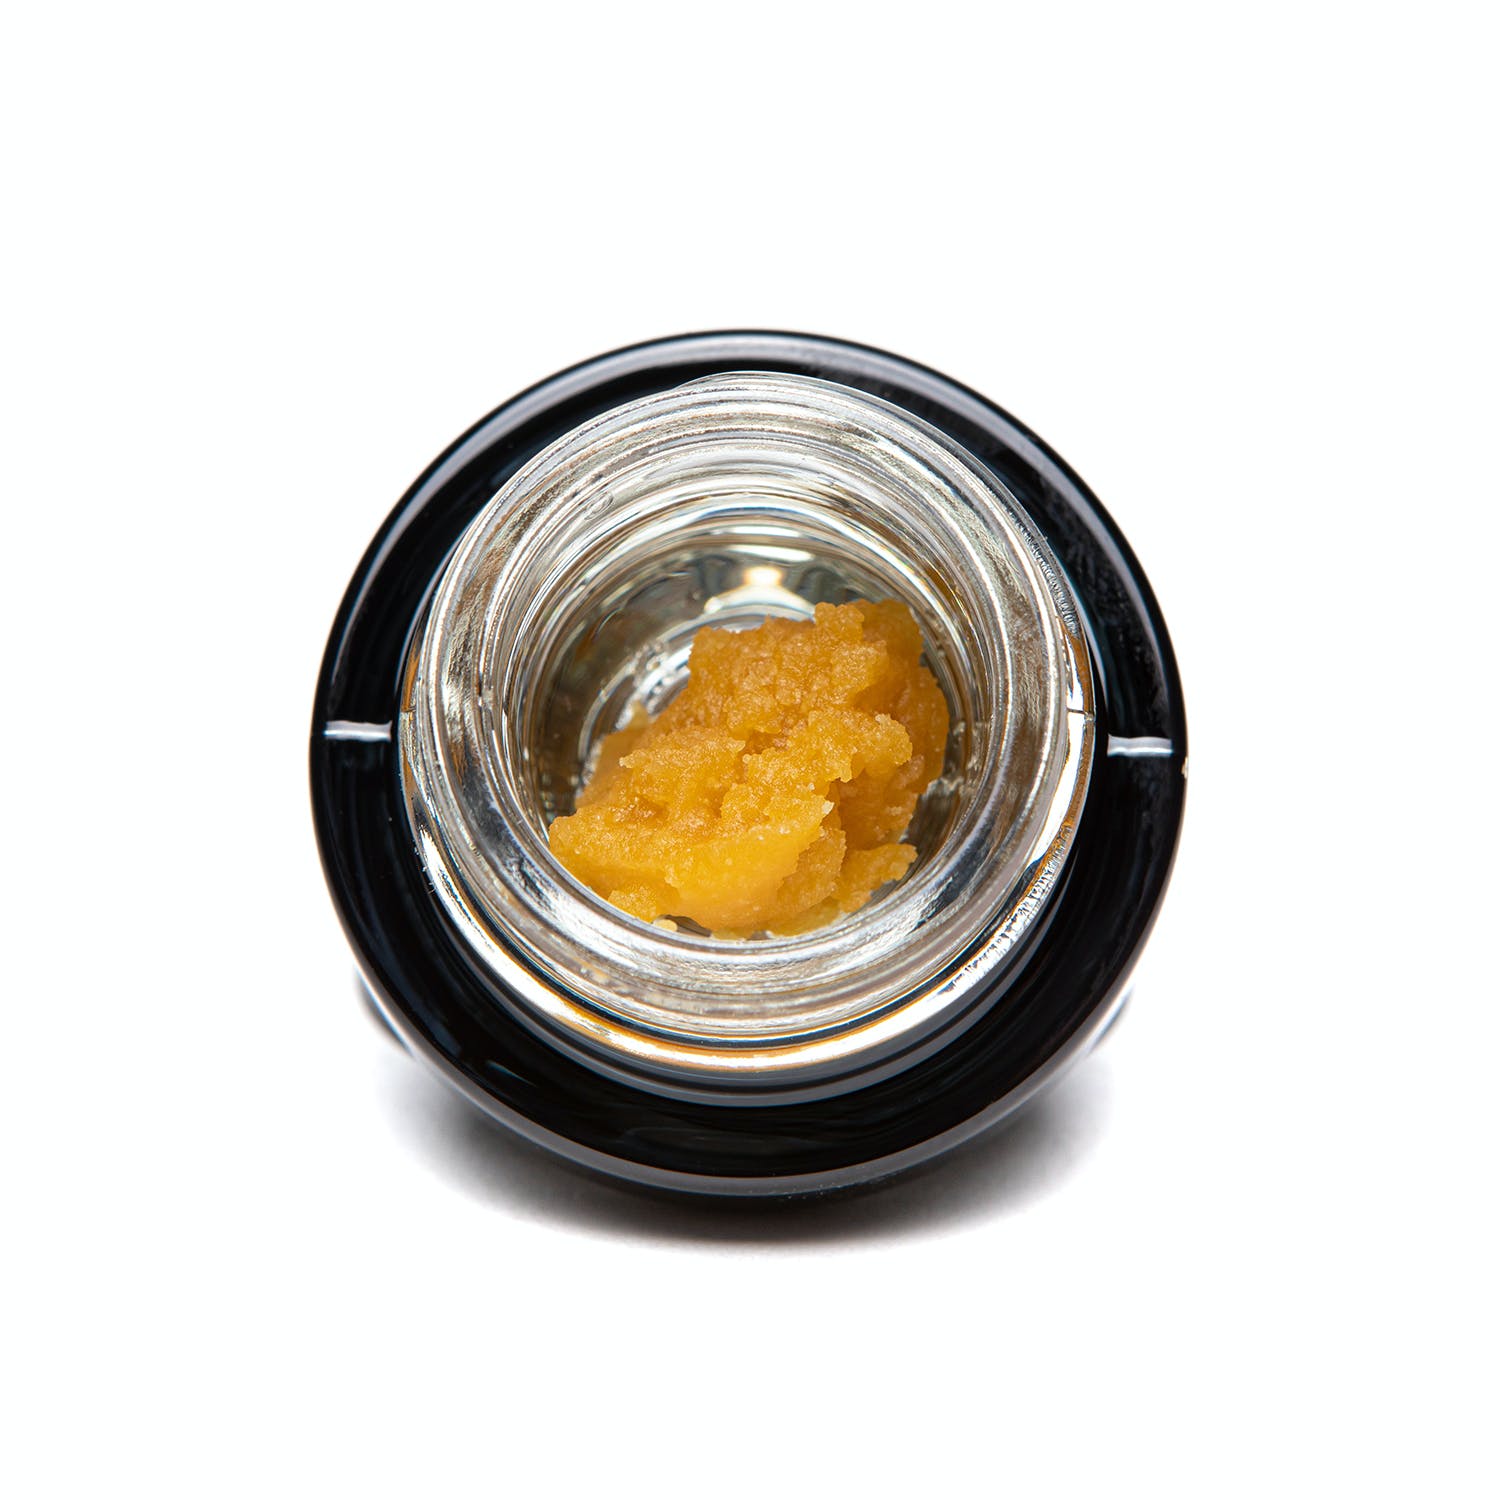 CONCENTRATES